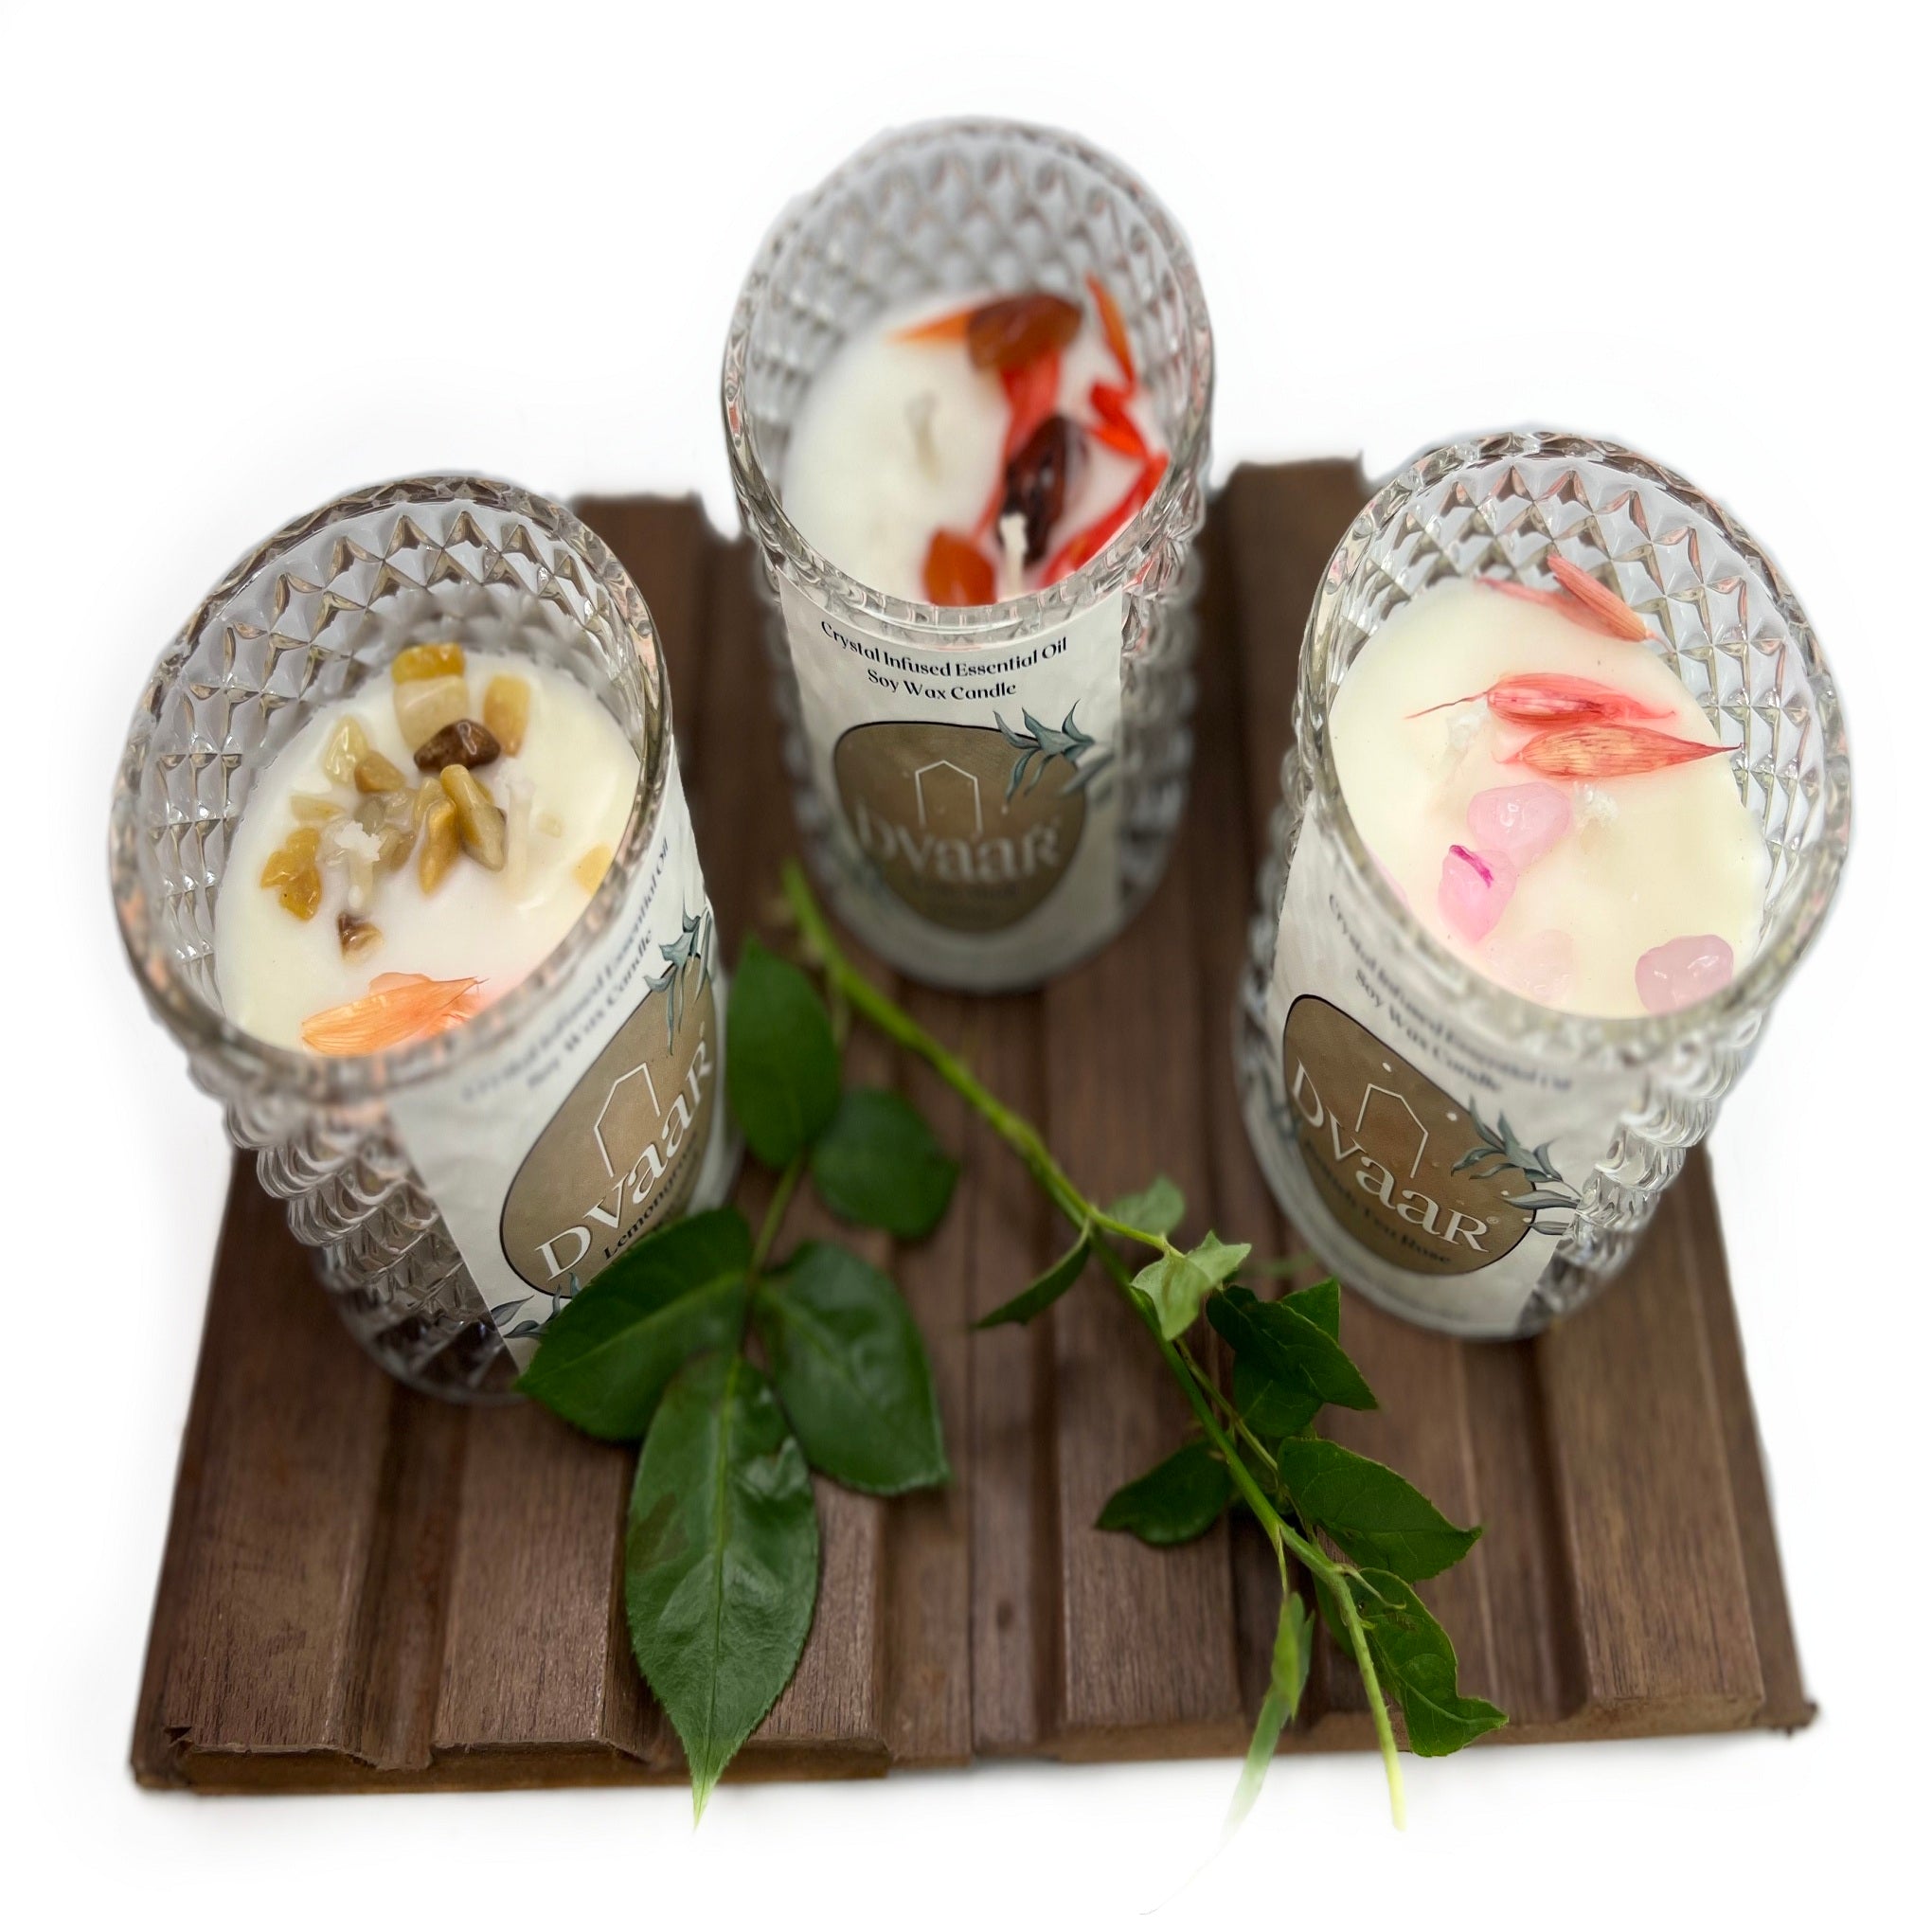 DVAAR SOYA WAX CANDLES SCENTED ECO FRIENDLY AROMATHERAPY MEDITATION HAND CRAFTED WITH NATURAL OILS CRYSTALS with GLASS JAR 280 GMS. FRAGRANCE-Lemon grass